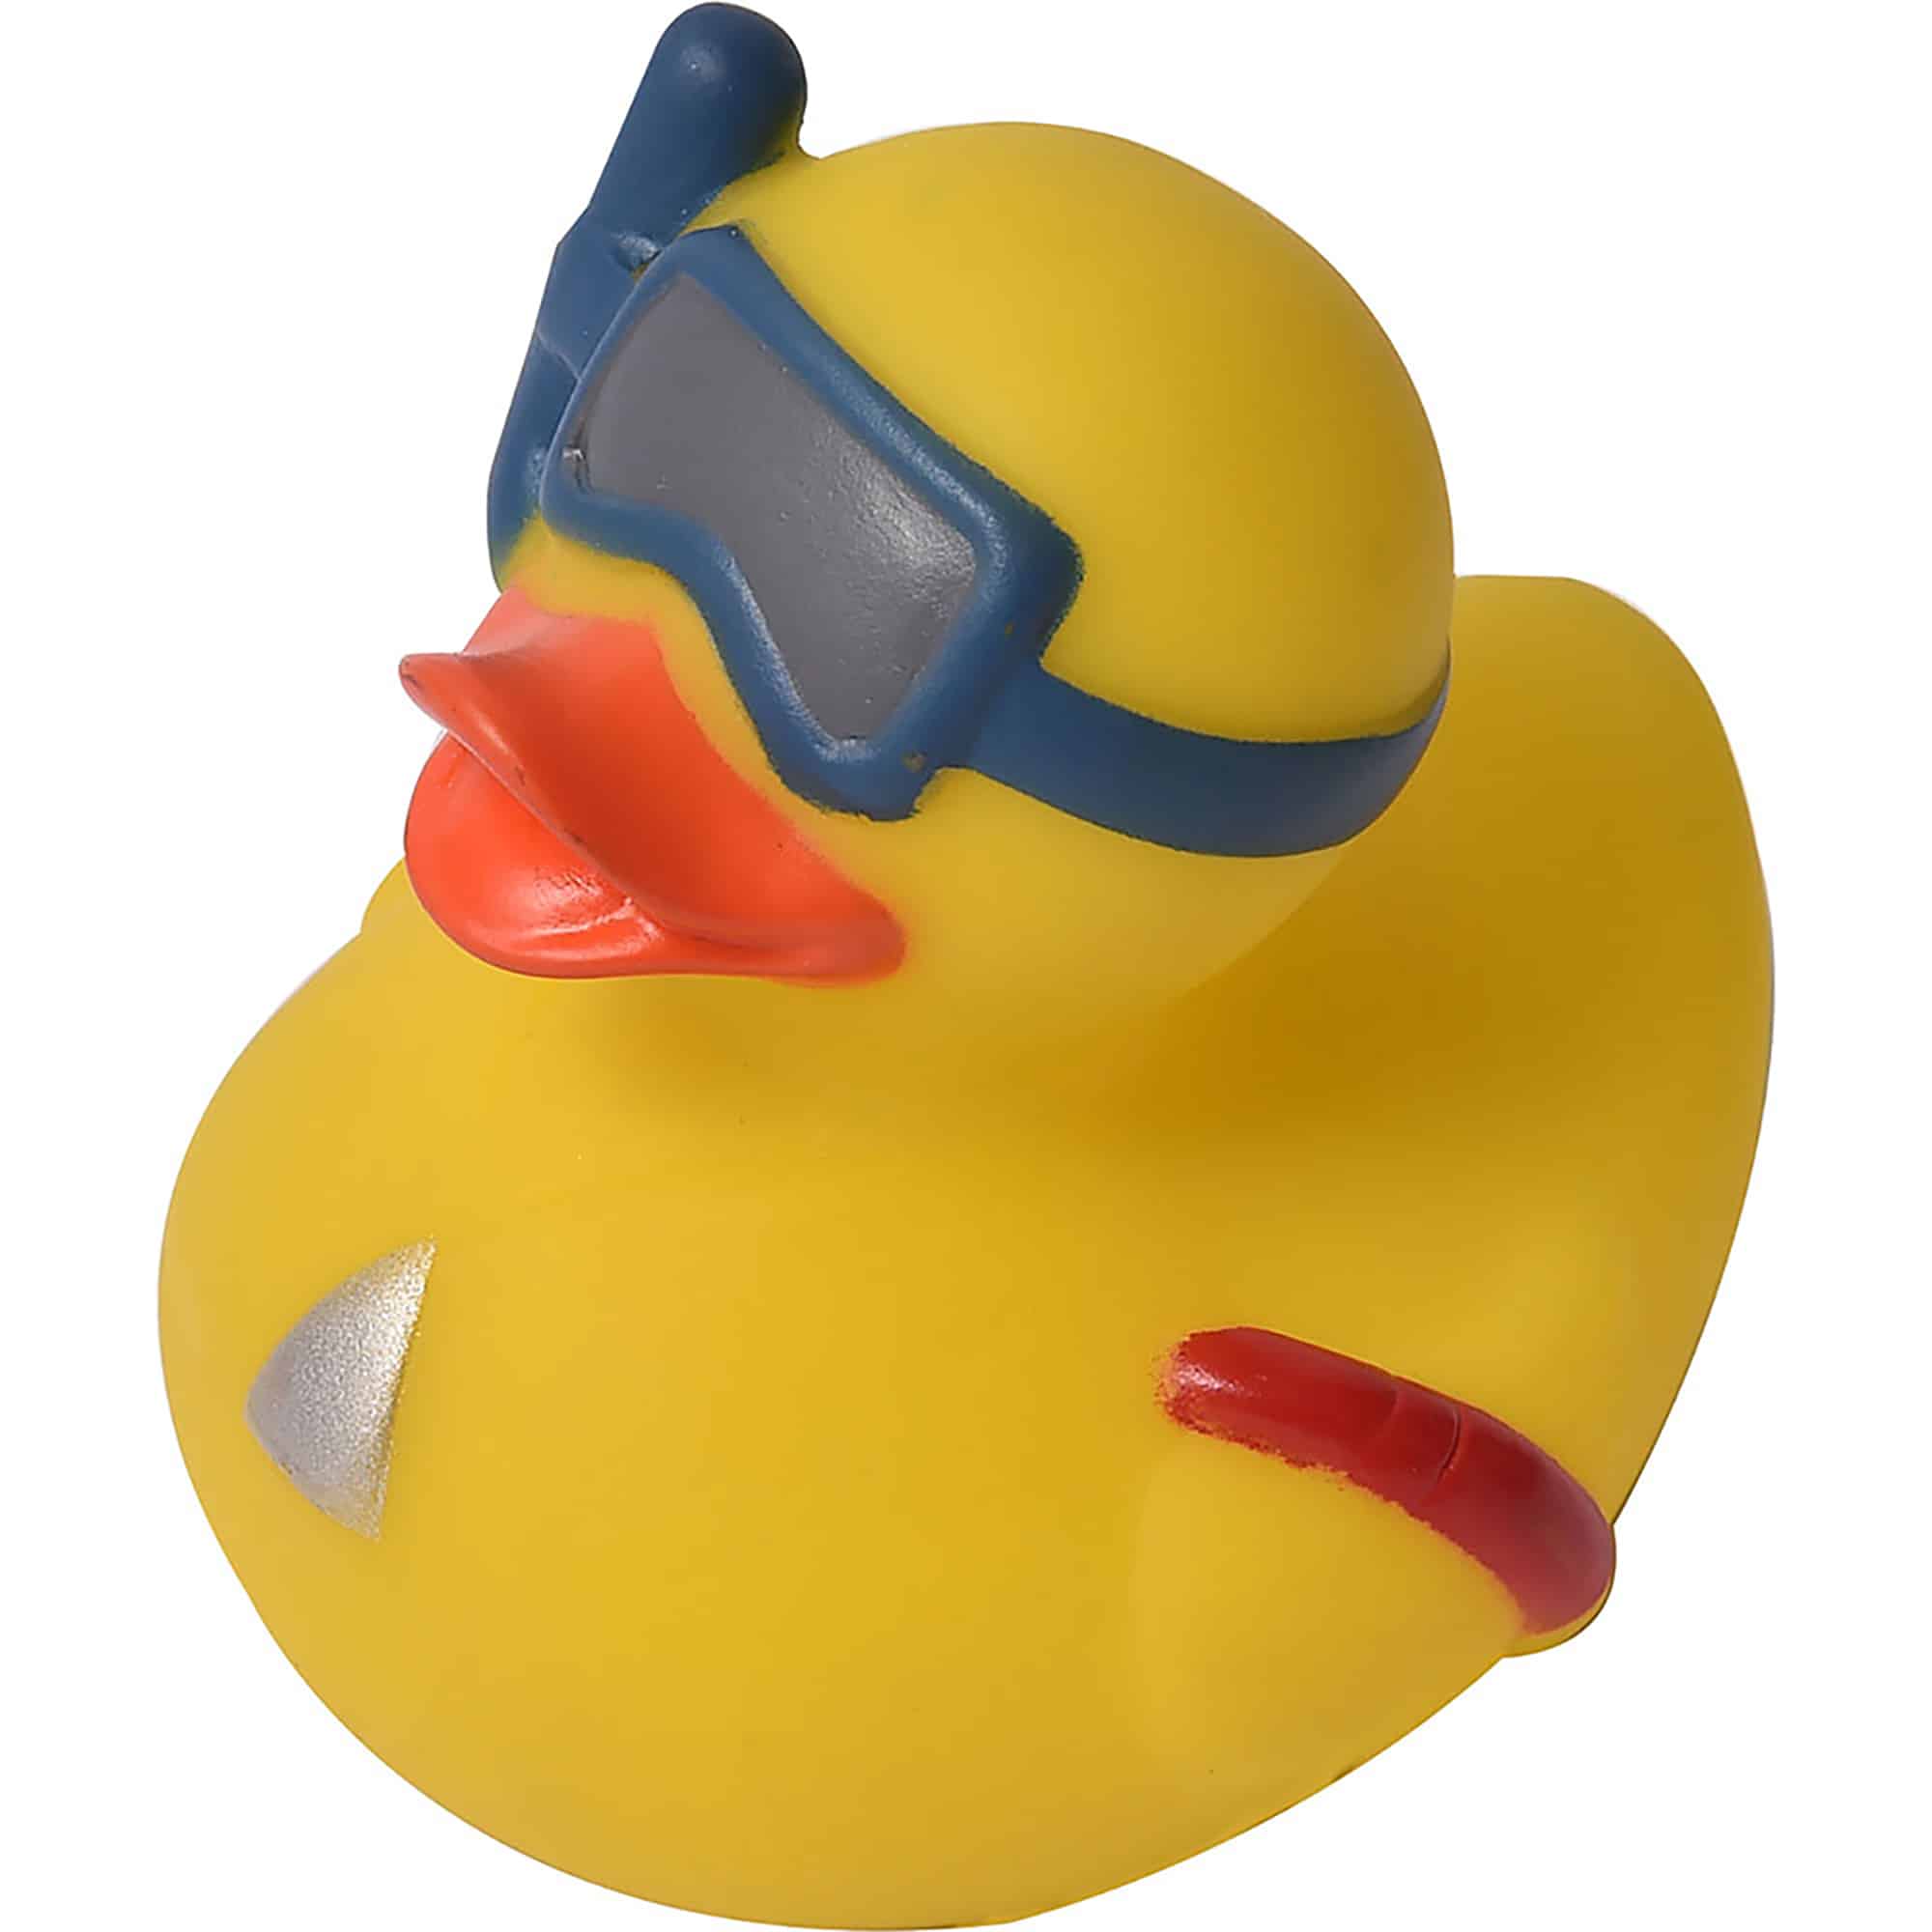 Non-Toxic Floating Bath Toy - Squeaky Yellow Diving Duck